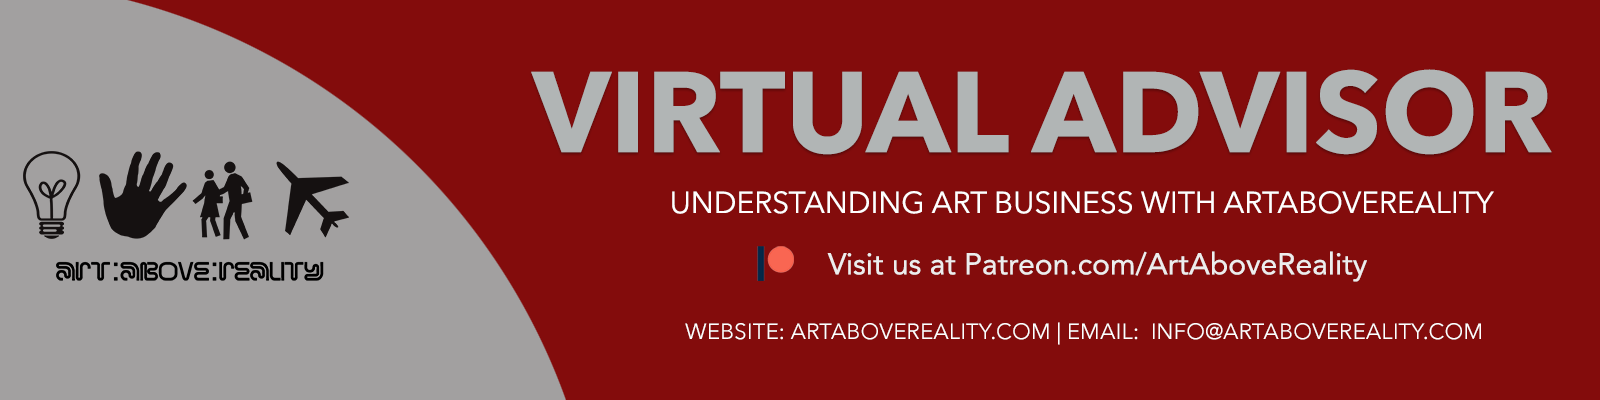 ArtAboveReality is teaching and creating art business education and art professional services.